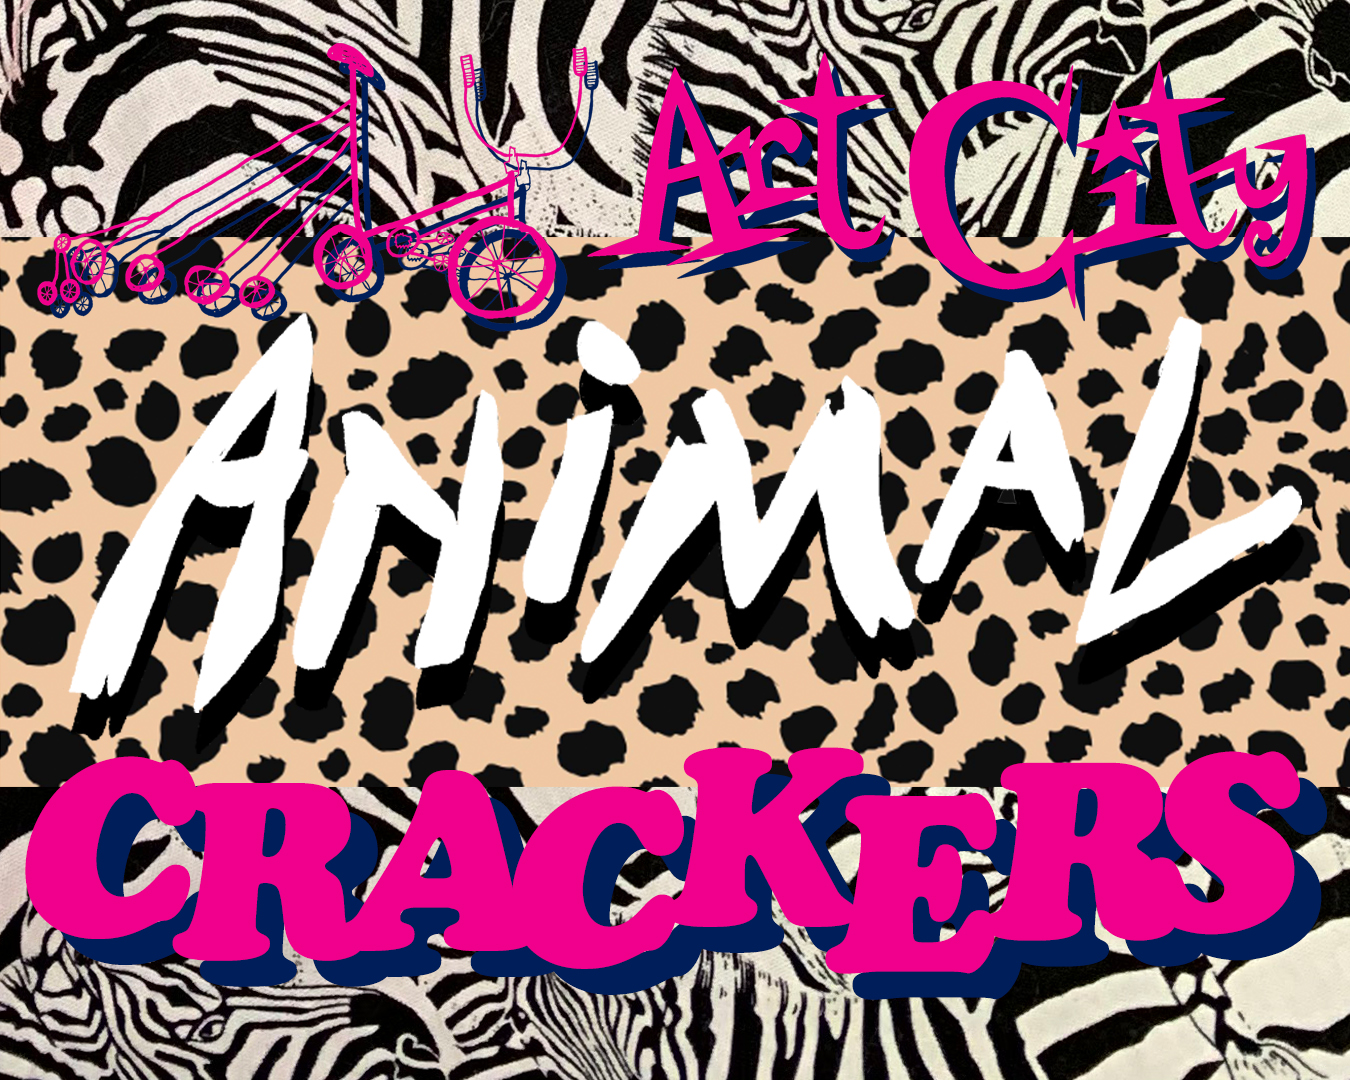 Art City Animal Crackers poster image featuring zebra print and leopard print and the title.
